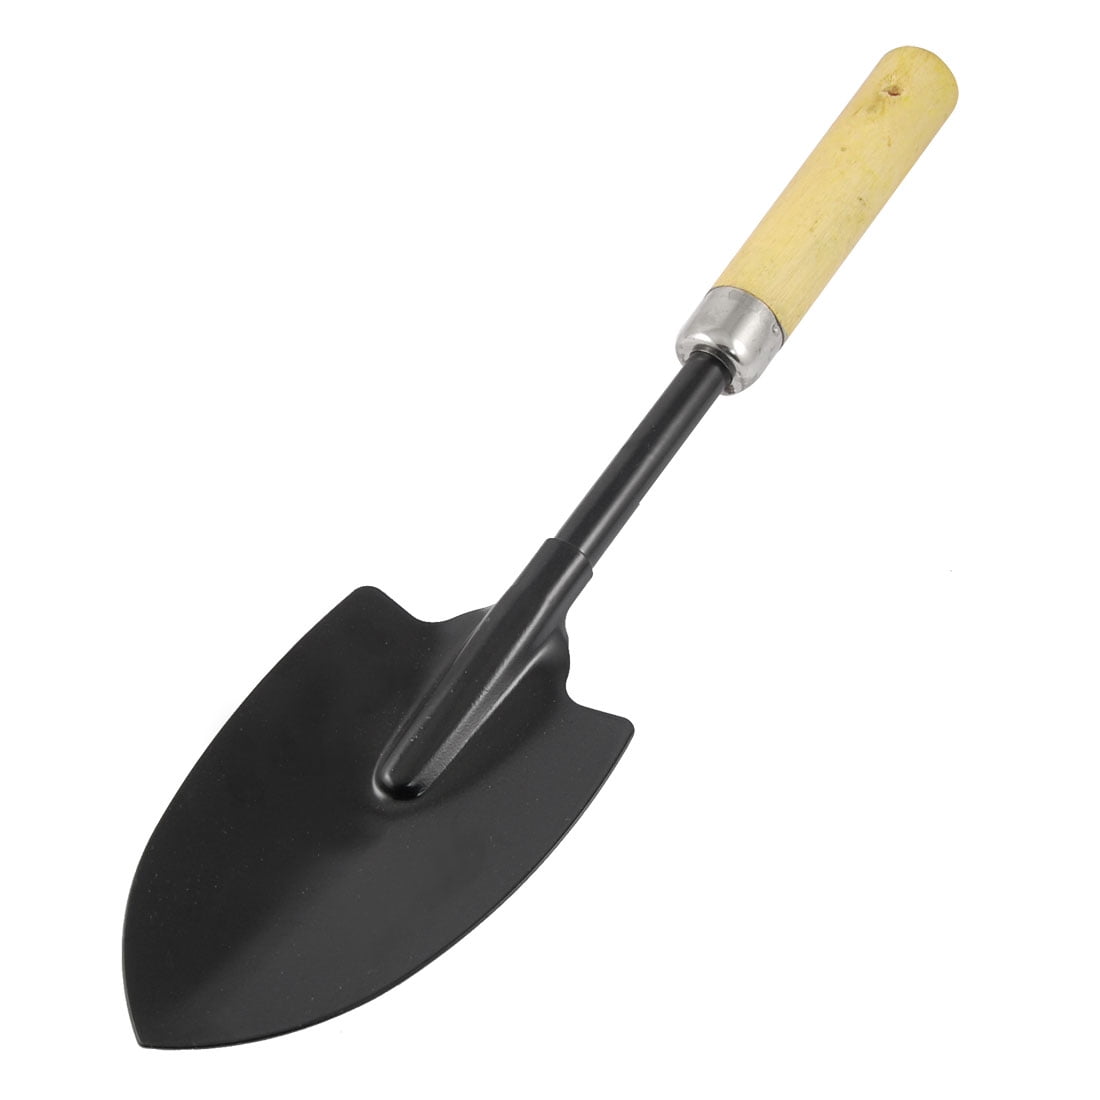 Details about   Stainless Steel Gardening Shovel Gardening Tool Home Plant Cultivation Shovel 